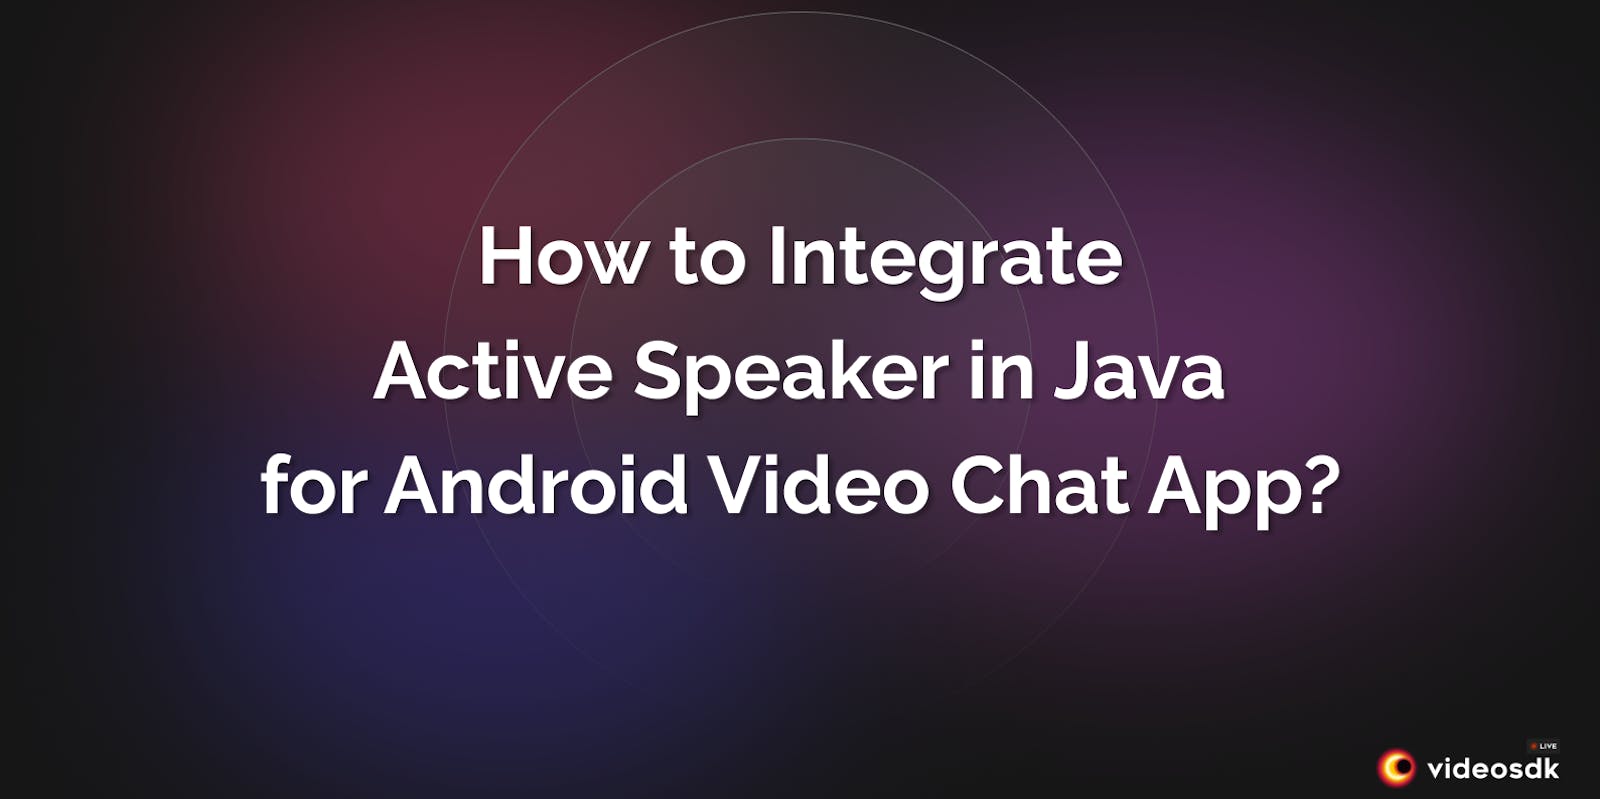 How to Integrate Active Speaker in Java for Android Video Chat App?